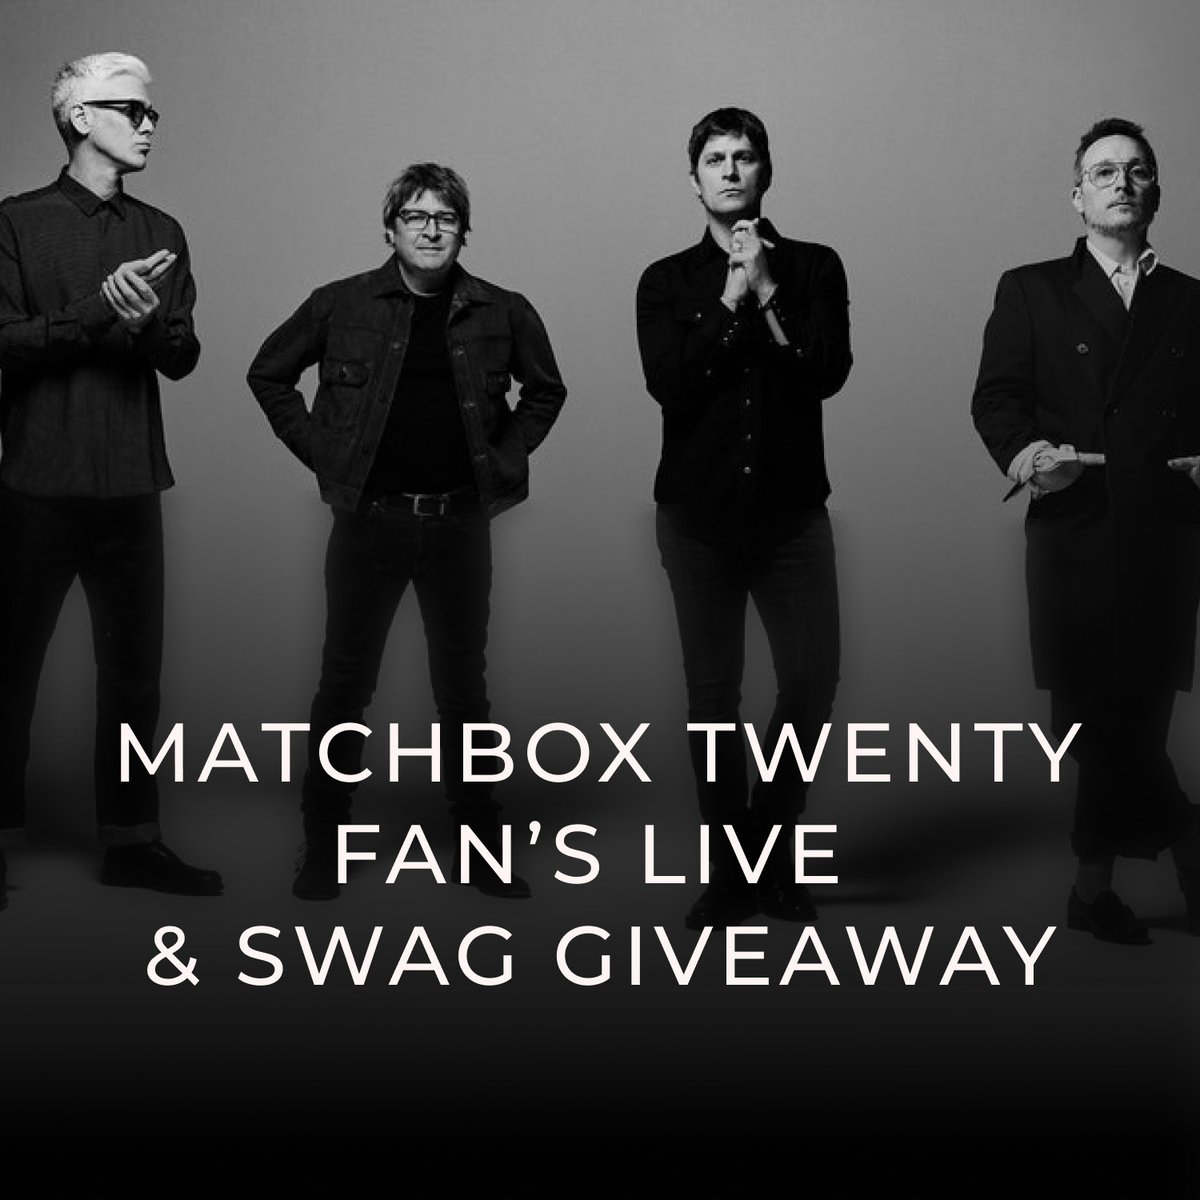 We are back!! Get Ready for our biggest Matchbox Twenty Giveaway yet! It’s your time, MB20 fans, to step up and speak out. Hang out with fellow super fans and sound off - share all the things you’re thinking live and out loud. Hosted by the Matchbox Twenty Team, Nick and Geoff,…